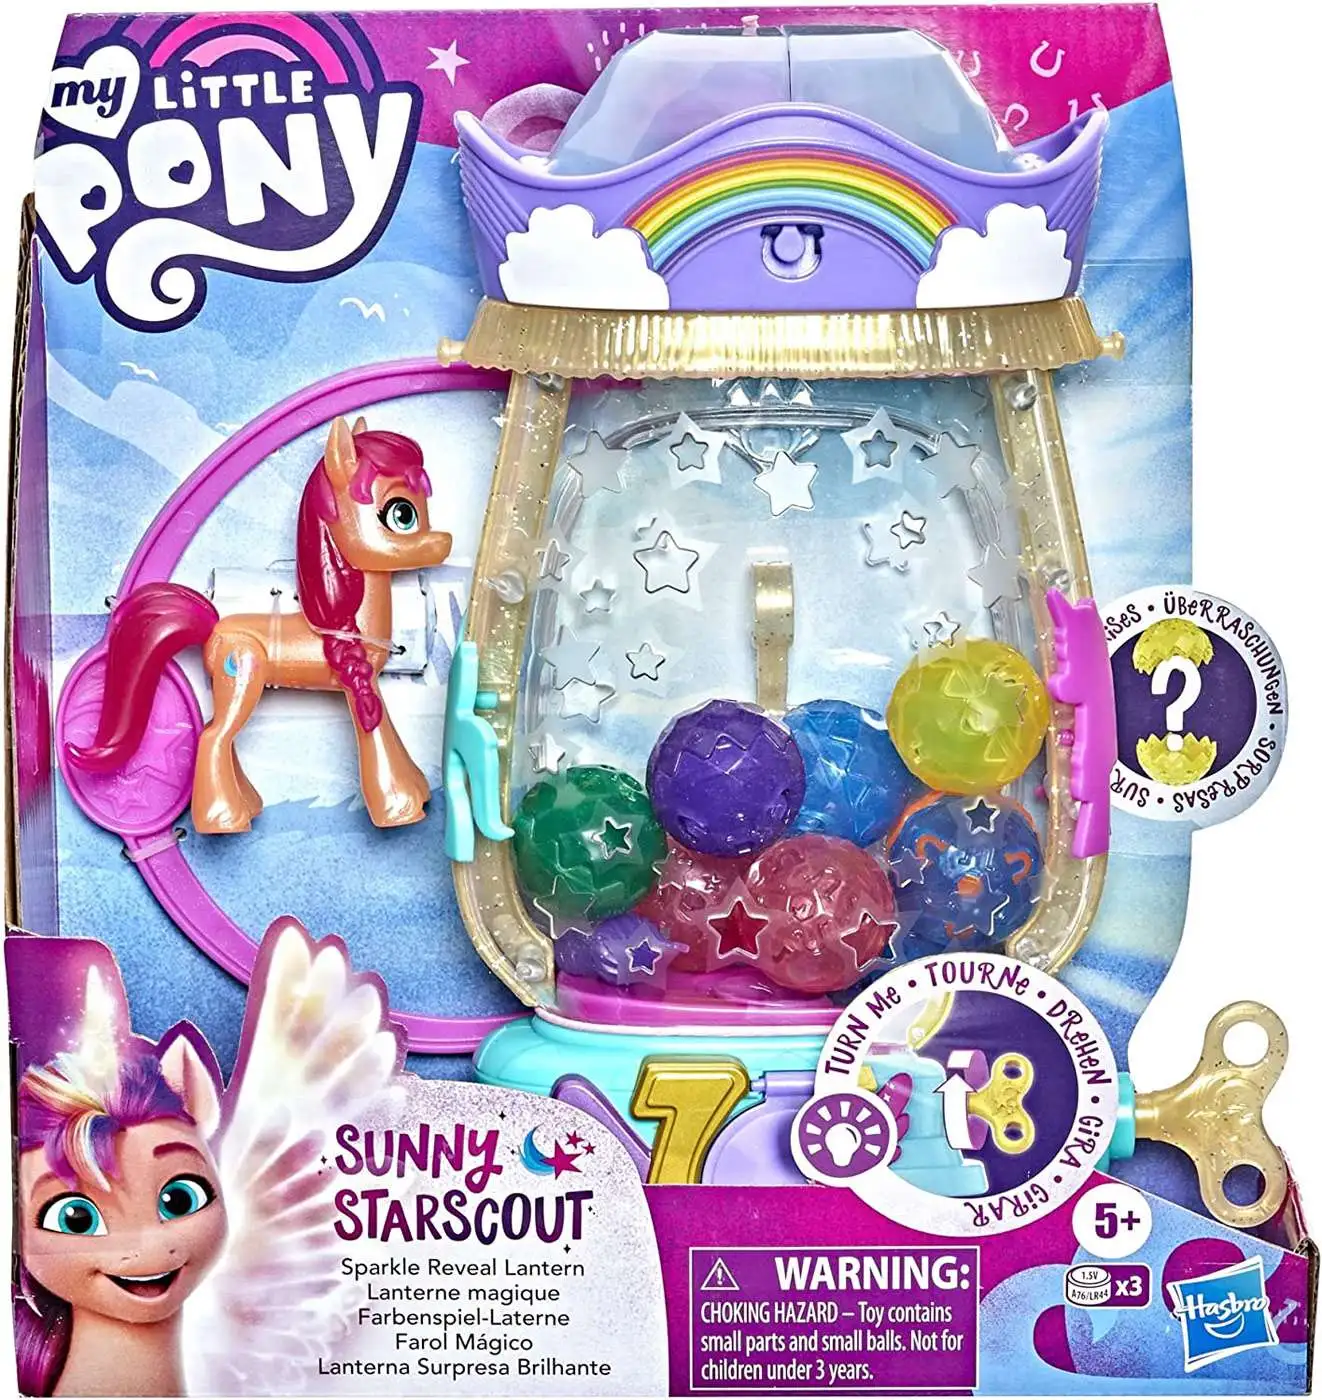 My Little Pony Musical Mane Melody Playset